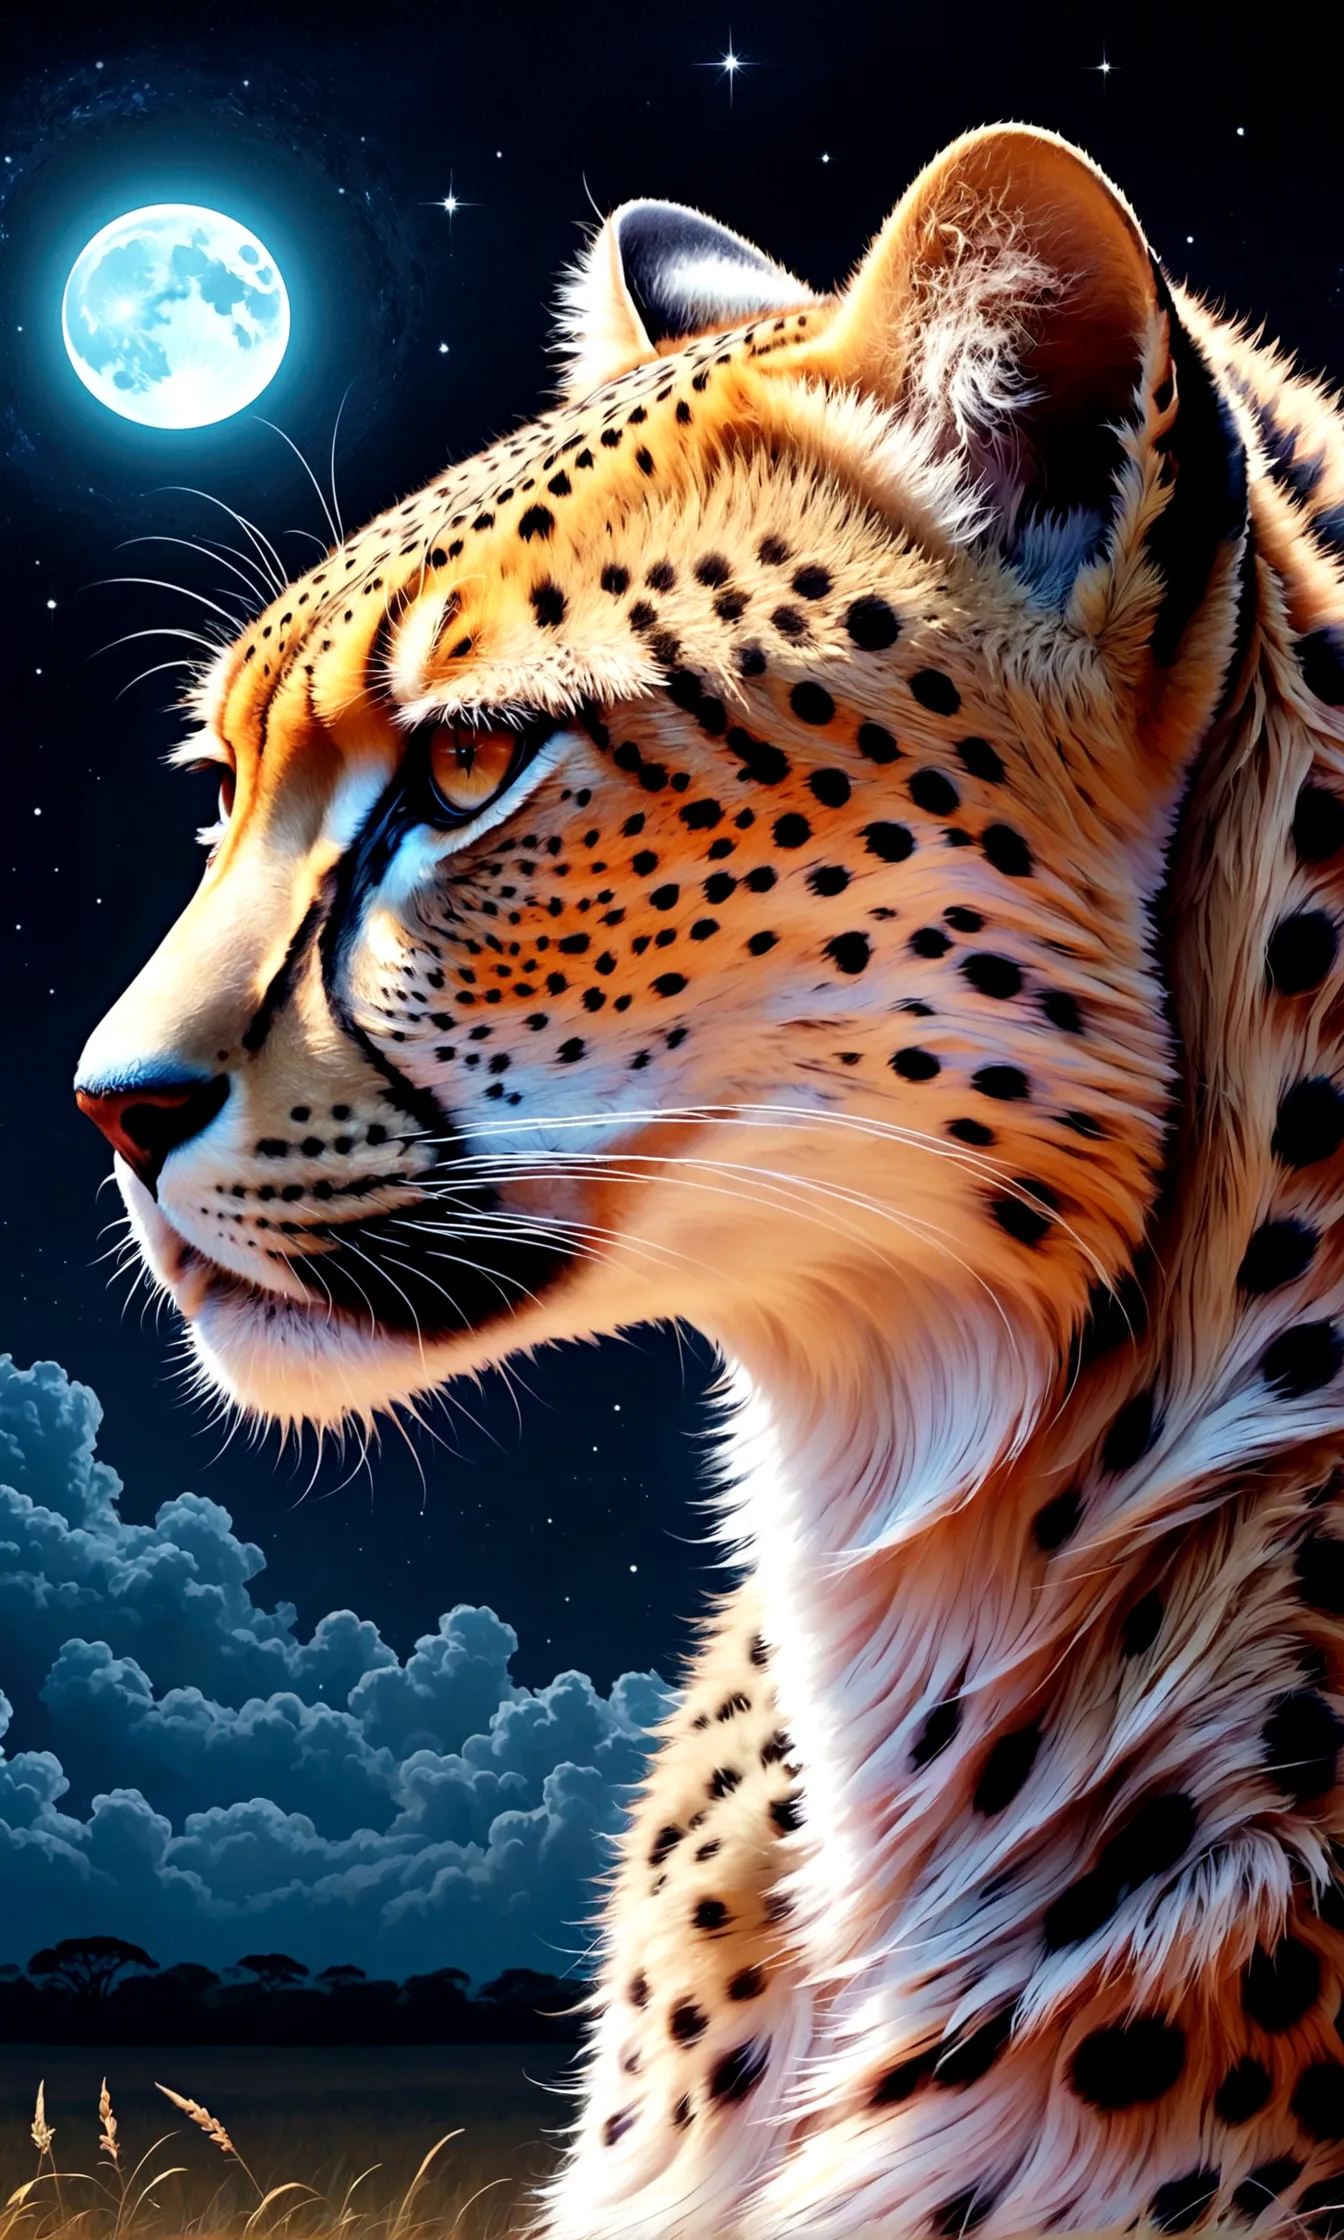 Draw a savannah landscape under the moon,A cheetah looking up at the sky,cheetah is female,This is a scene that rose from the de...